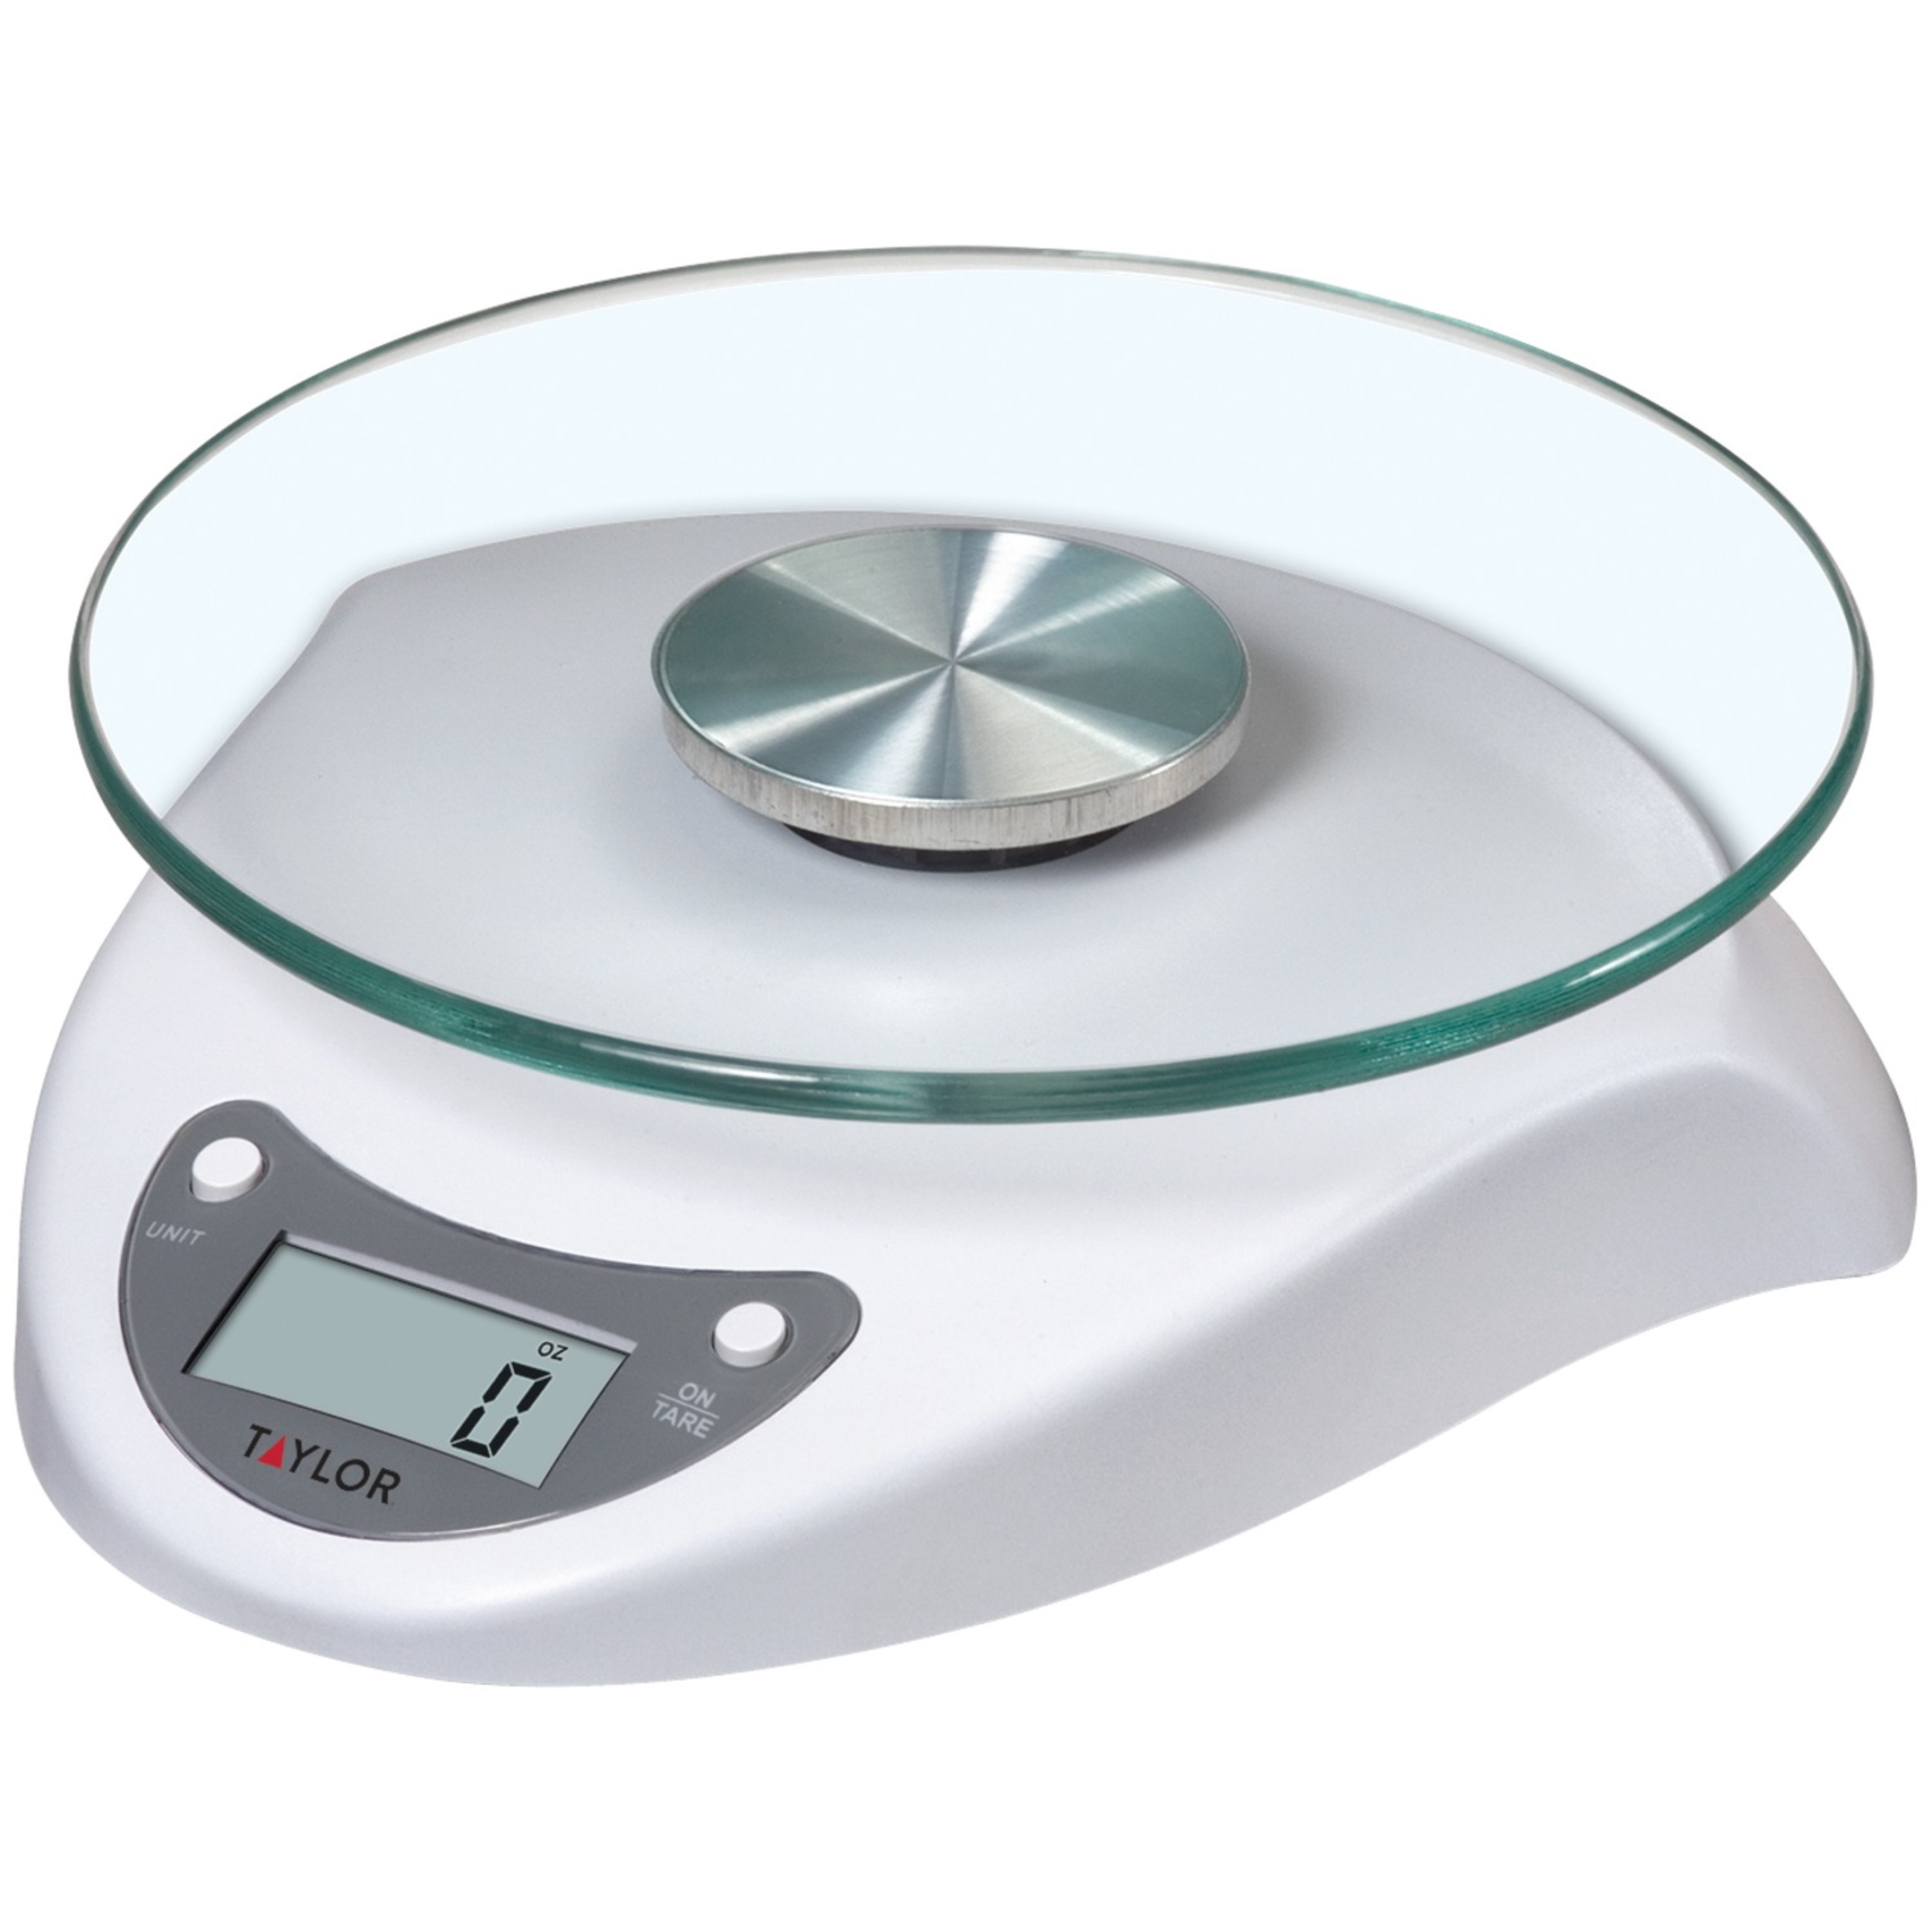 Taylor Digital Glass Platform White Base Food Scale and Kitchen Scale - image 1 of 10